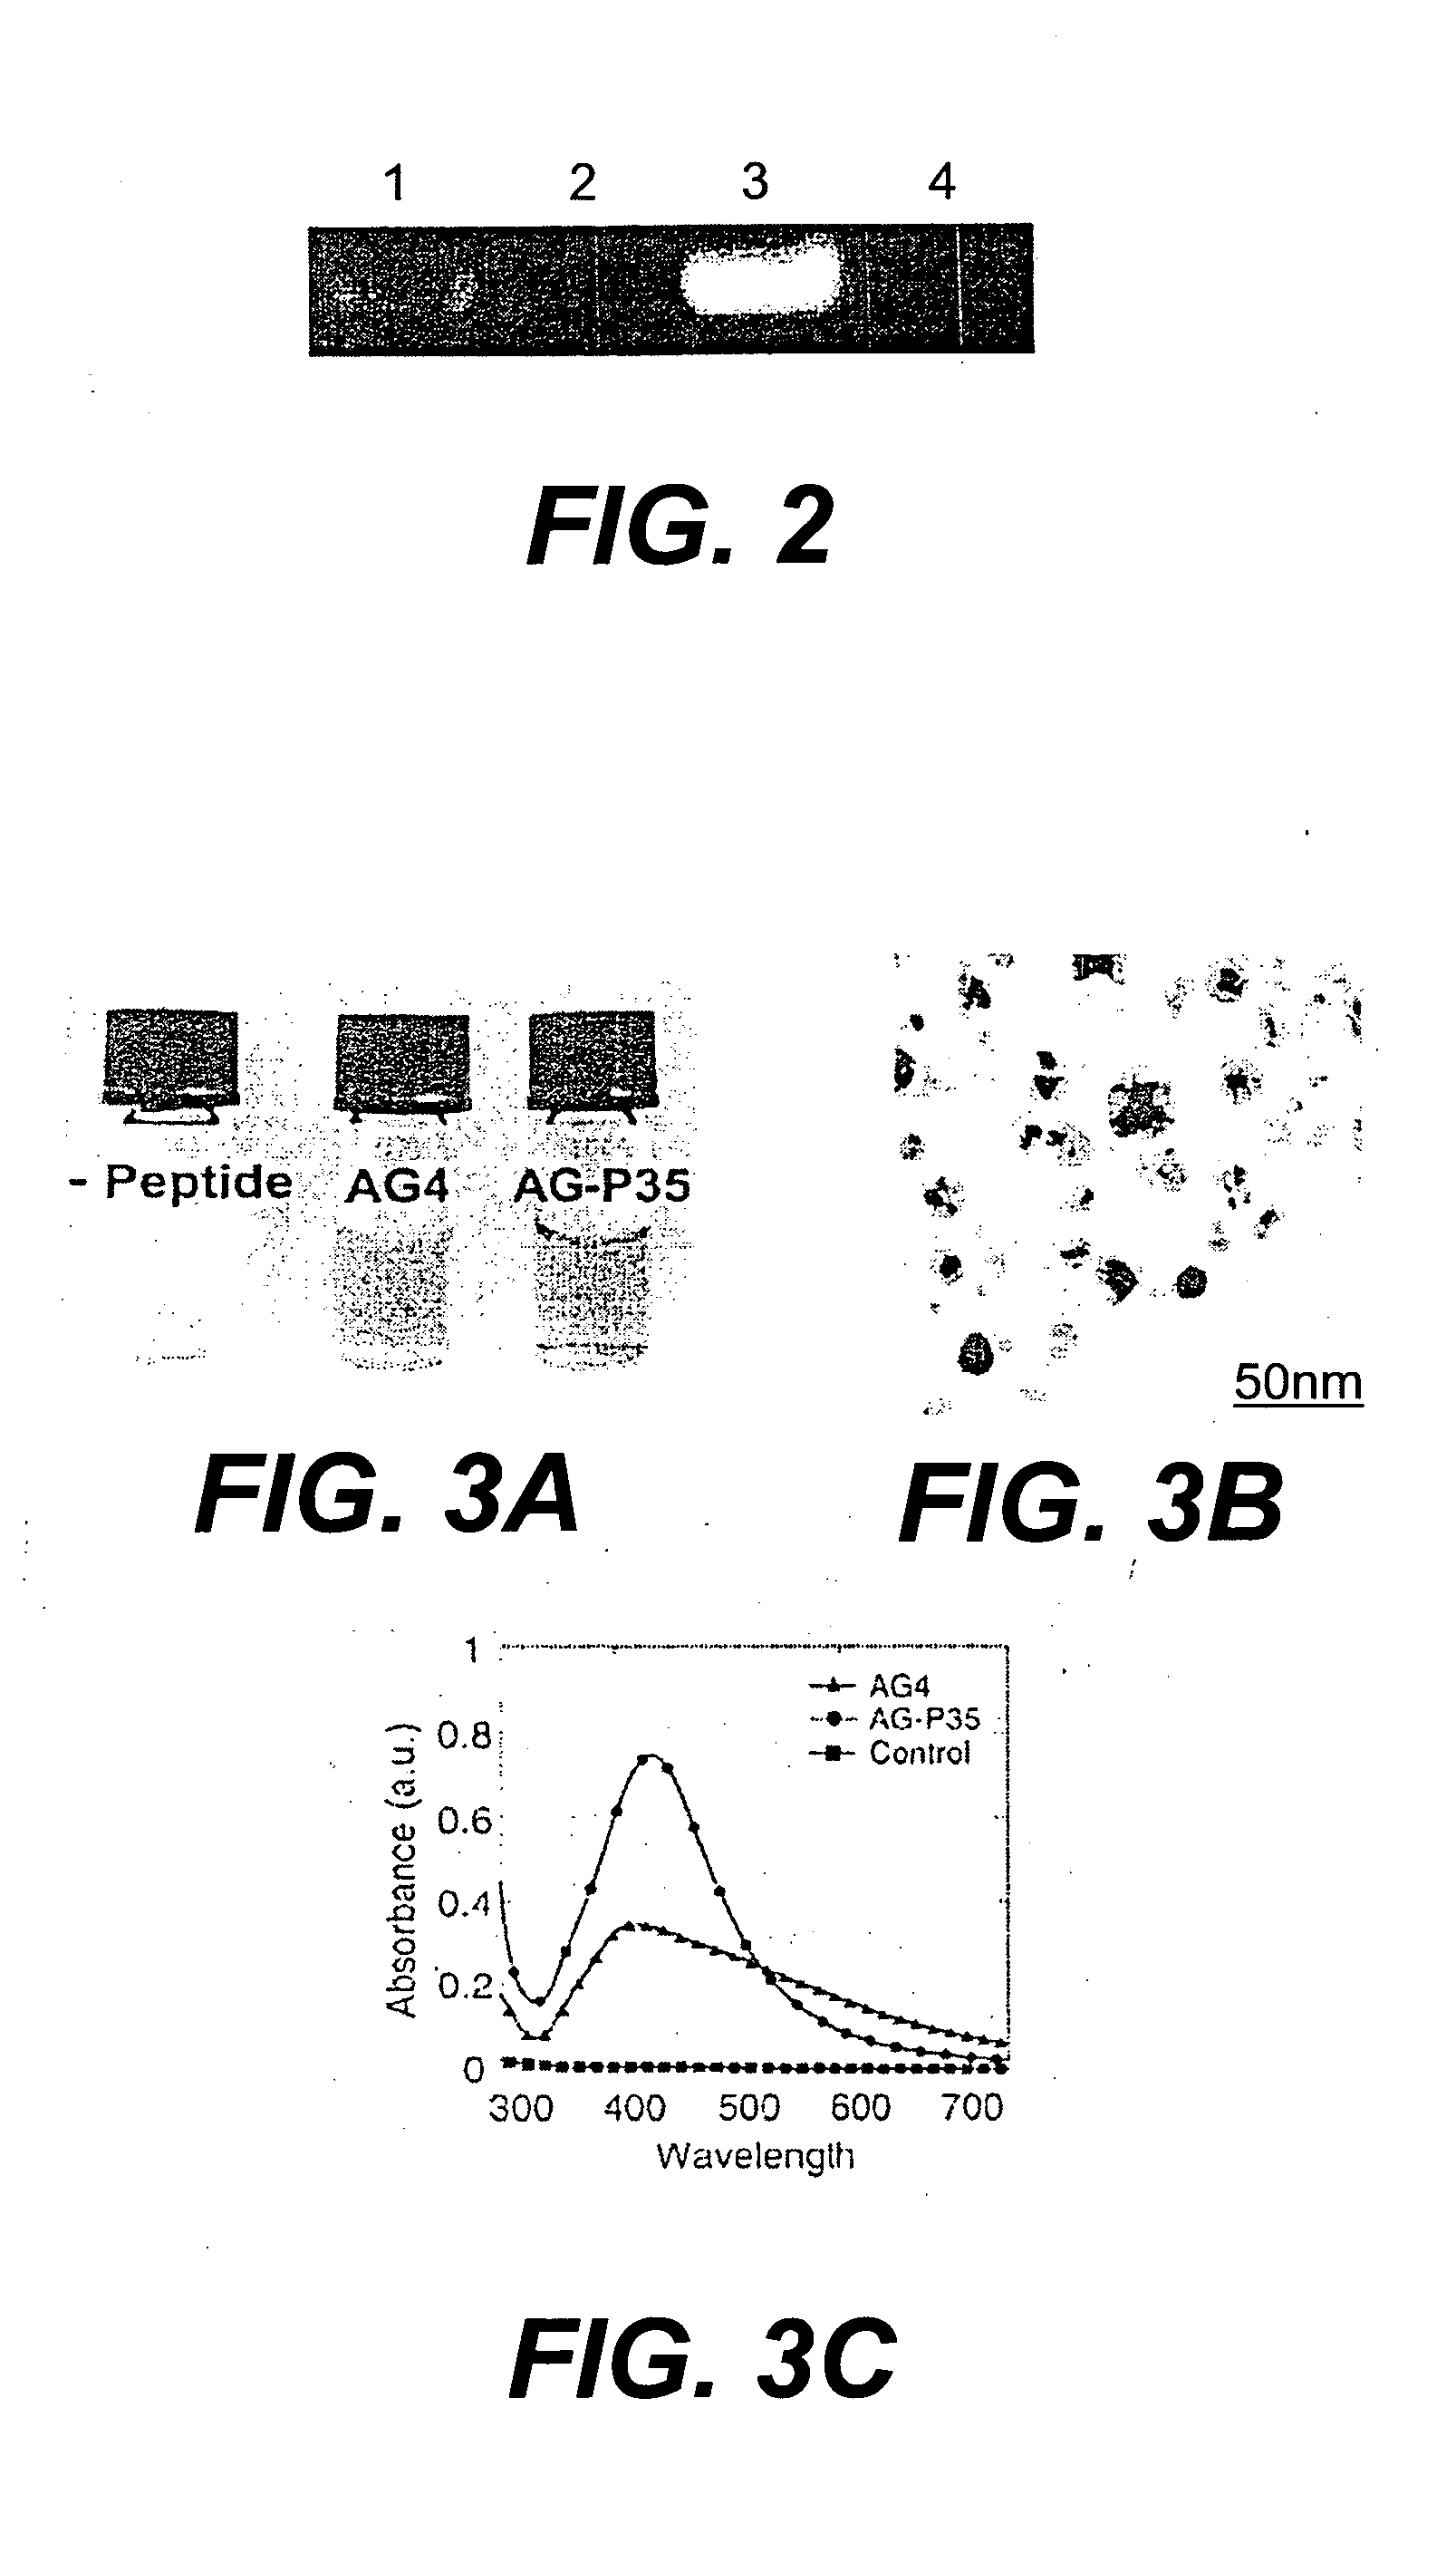 Peptide templates for nanoparticle synthesis obtained through PCR-driven phage display method